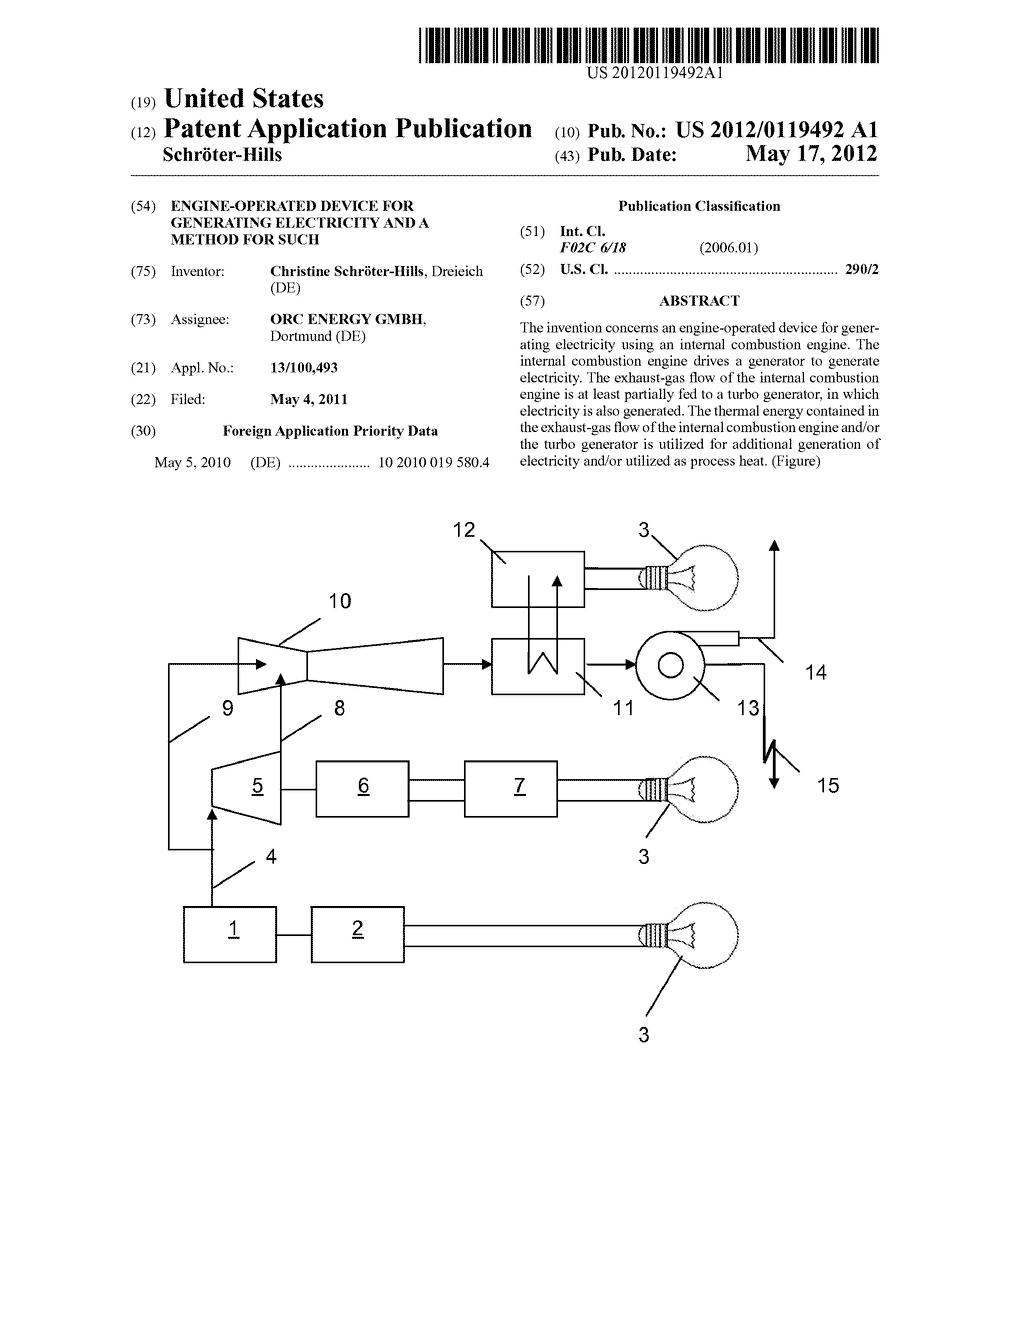 Engine-Operated Device for Generating Electricity and a Method for Such - diagram, schematic, and image 01